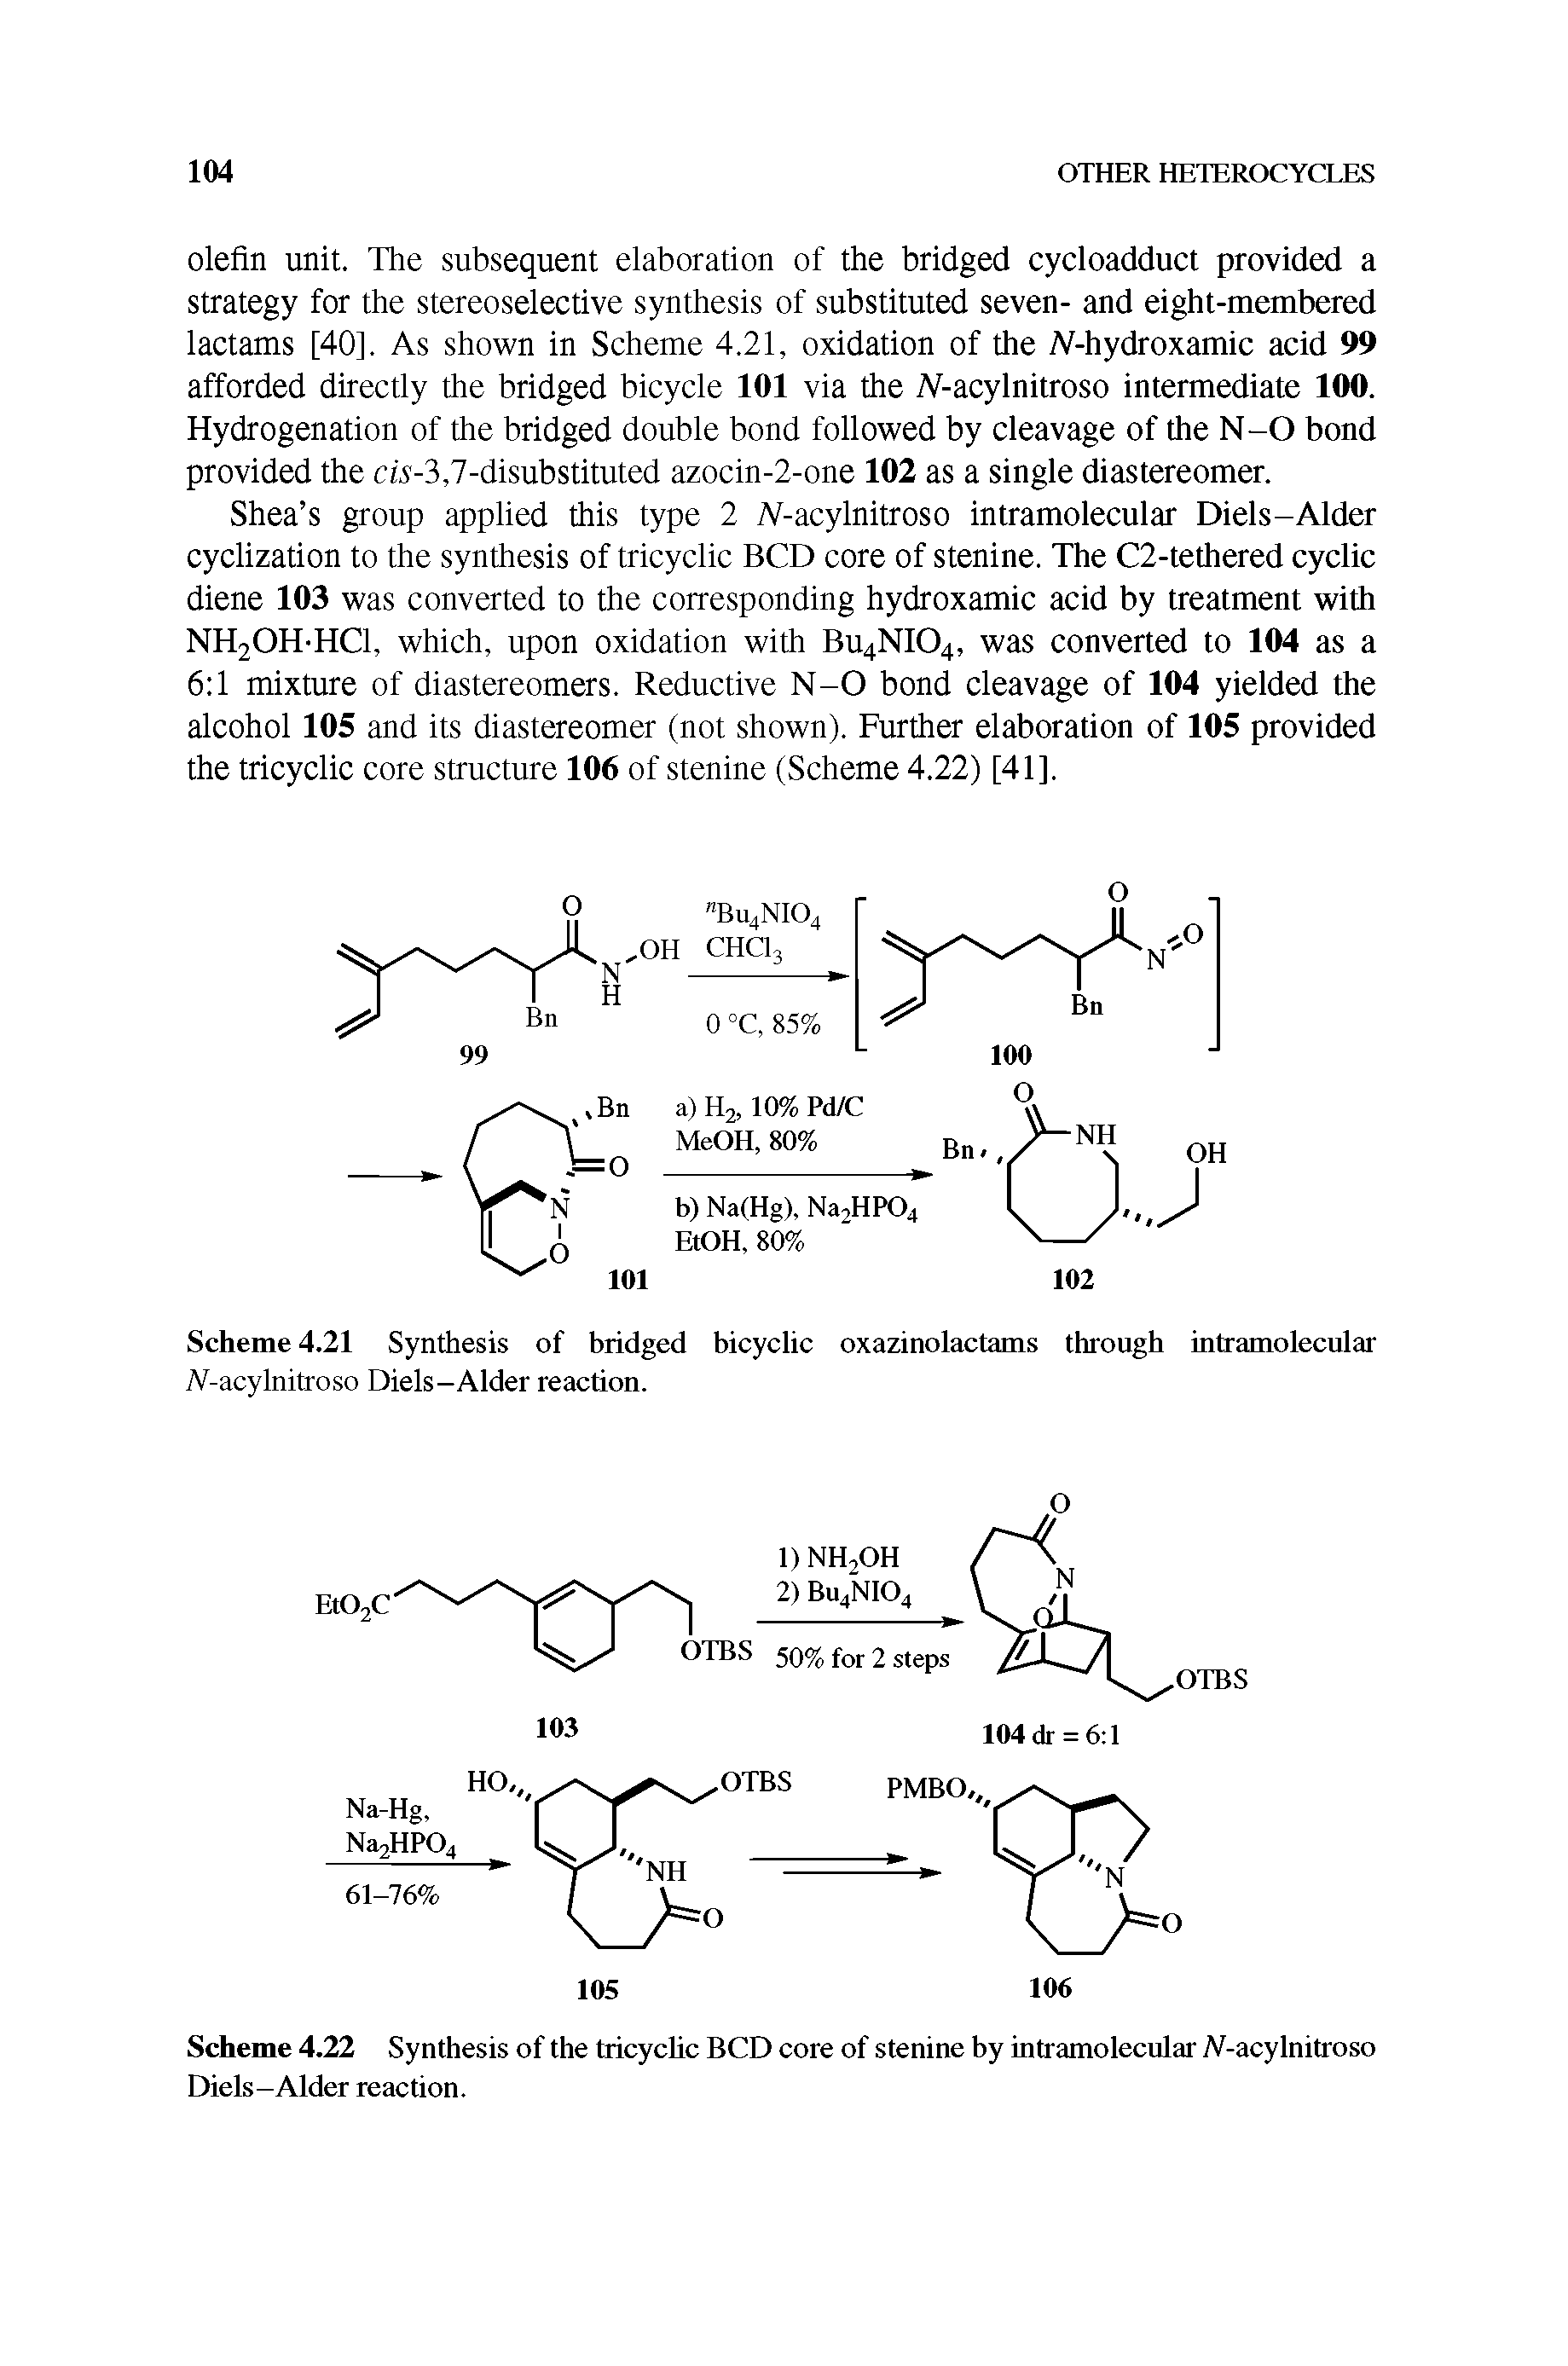 Scheme 4.22 Synthesis of the tricychc BCD core of stenine by intramolecular Af-acylnitroso Diels-Alder reaction.